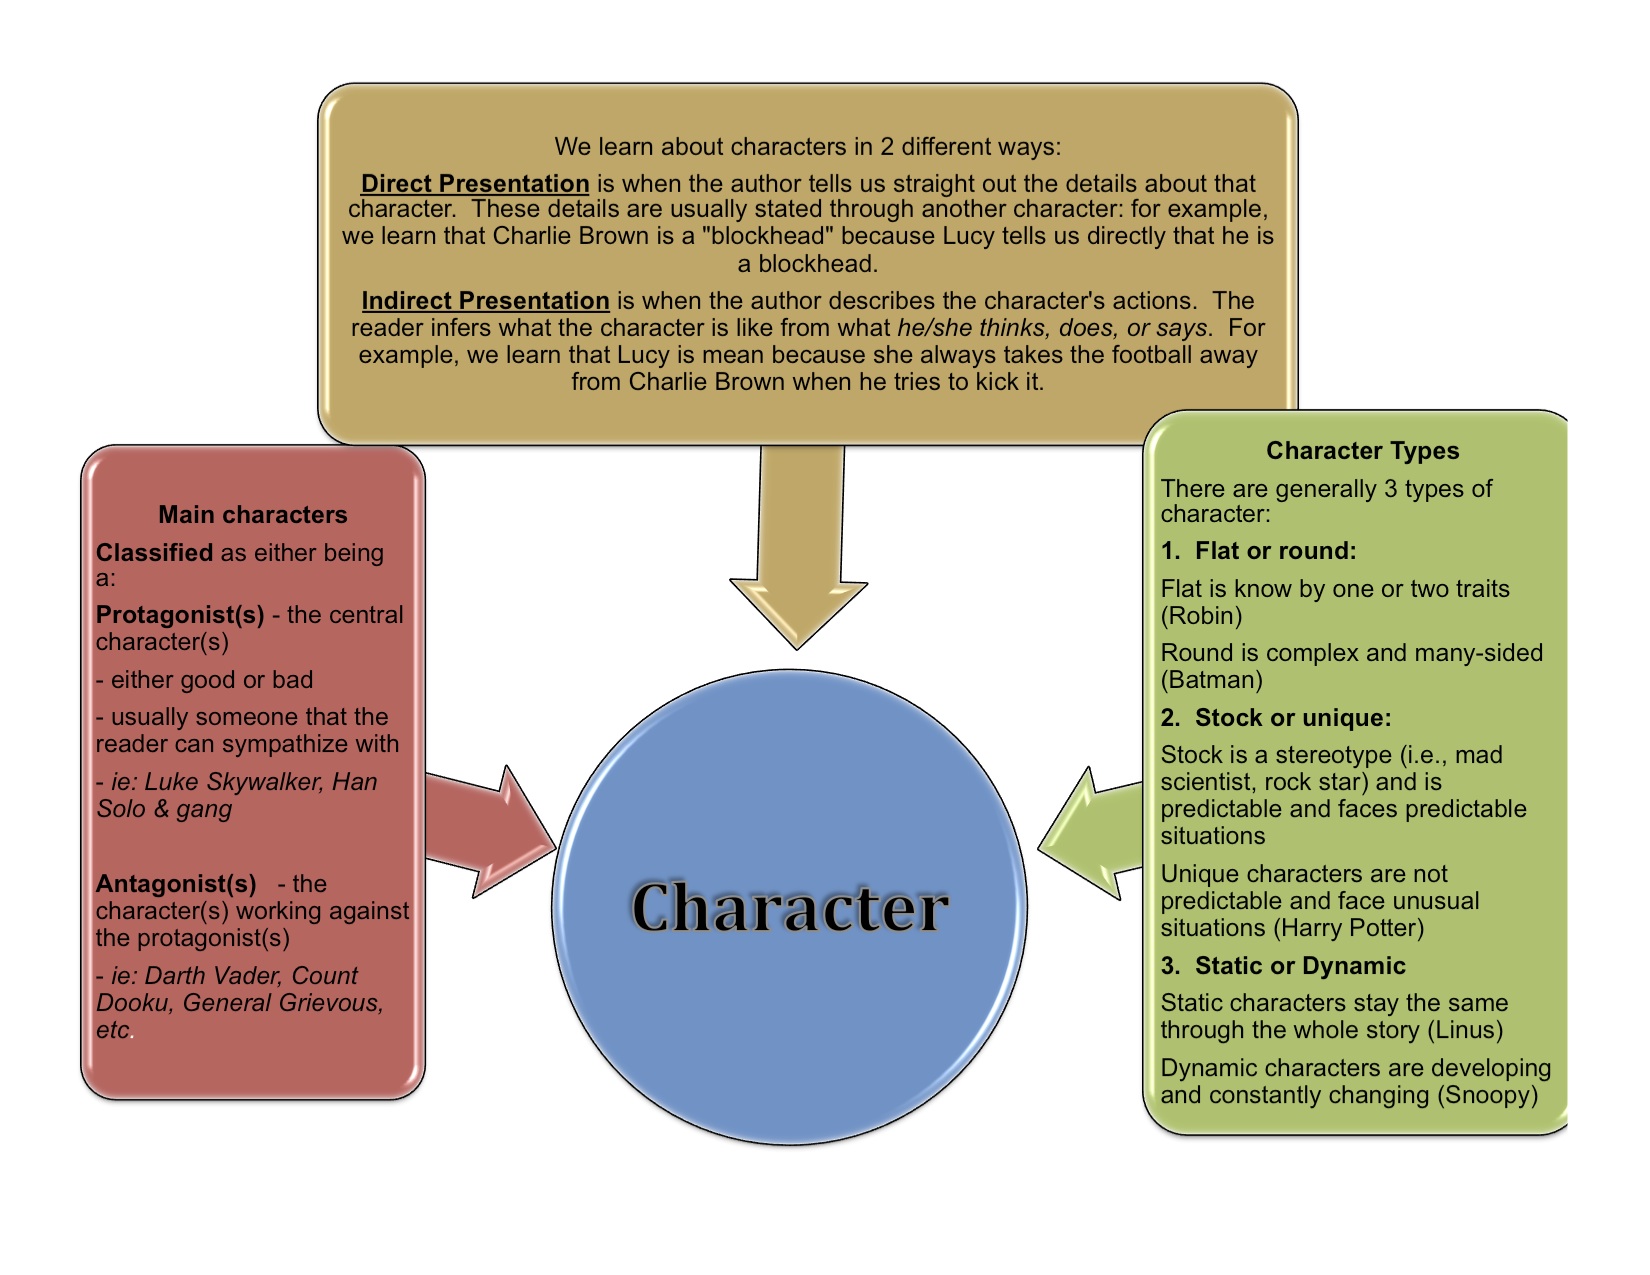 characternotesvisual (click for here.pdf file)